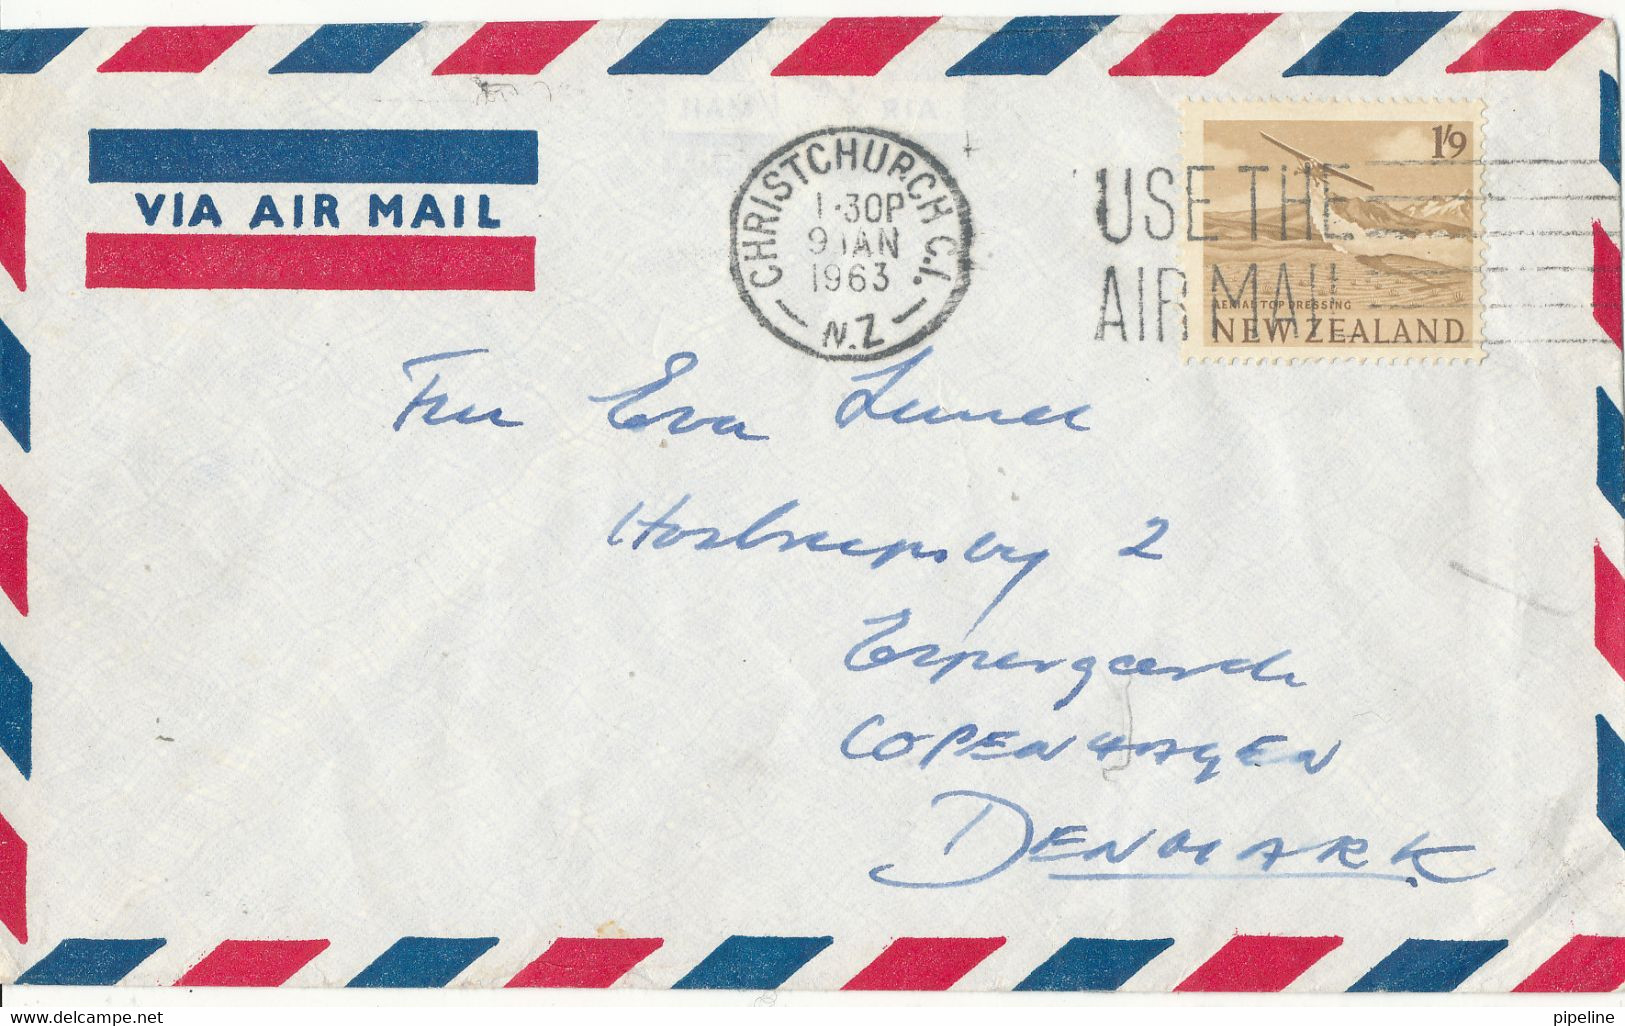 New Zealand Air Mail Cover Sent To Denmark Christchurch 9-1-1963 - Luftpost